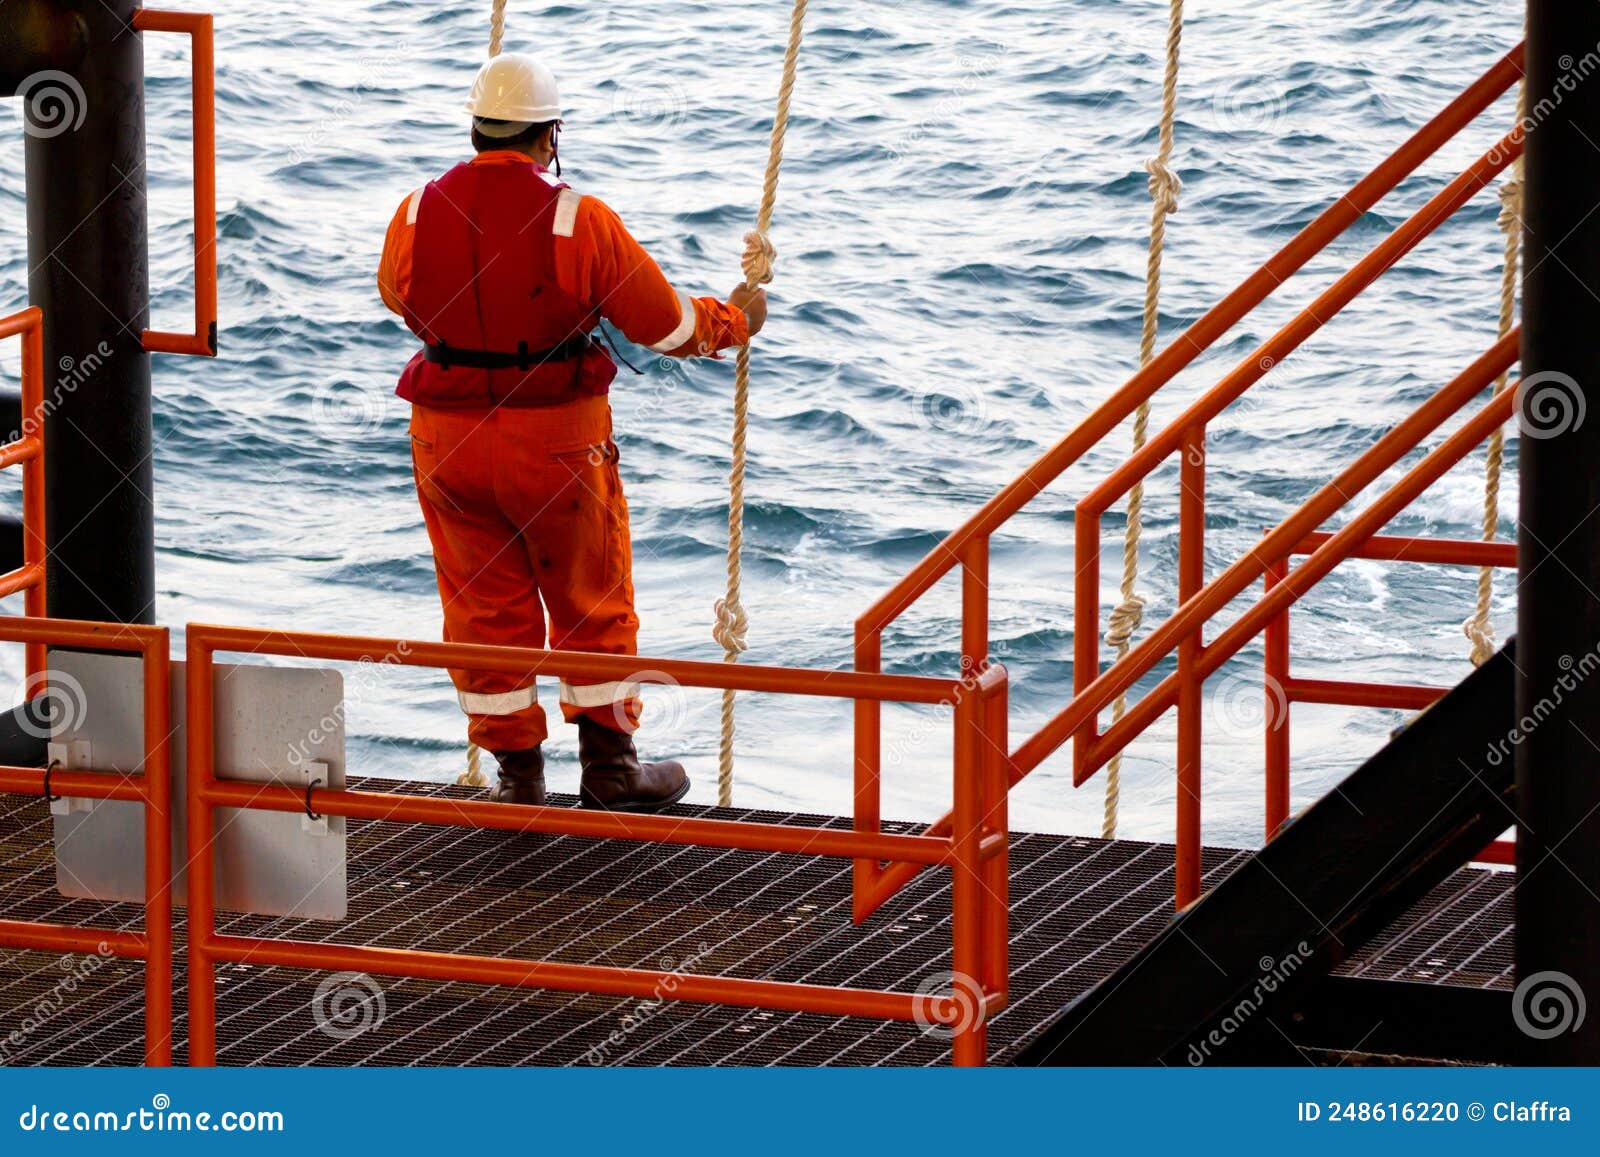 Rig Workers are Transported by Vessel To Offshore Rigs Editorial